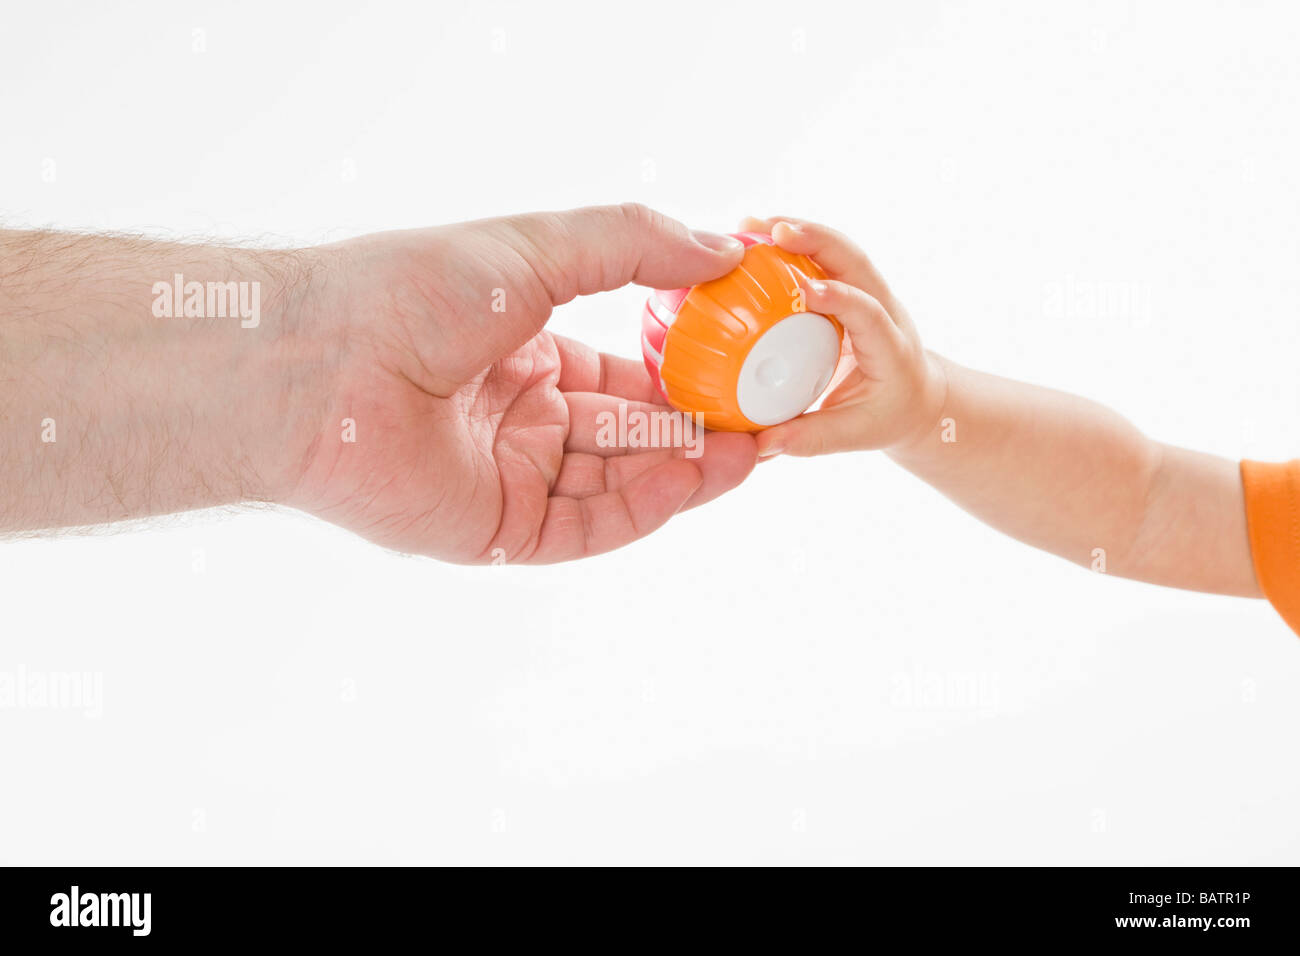 man giving ball to a baby, close-up view Stock Photo